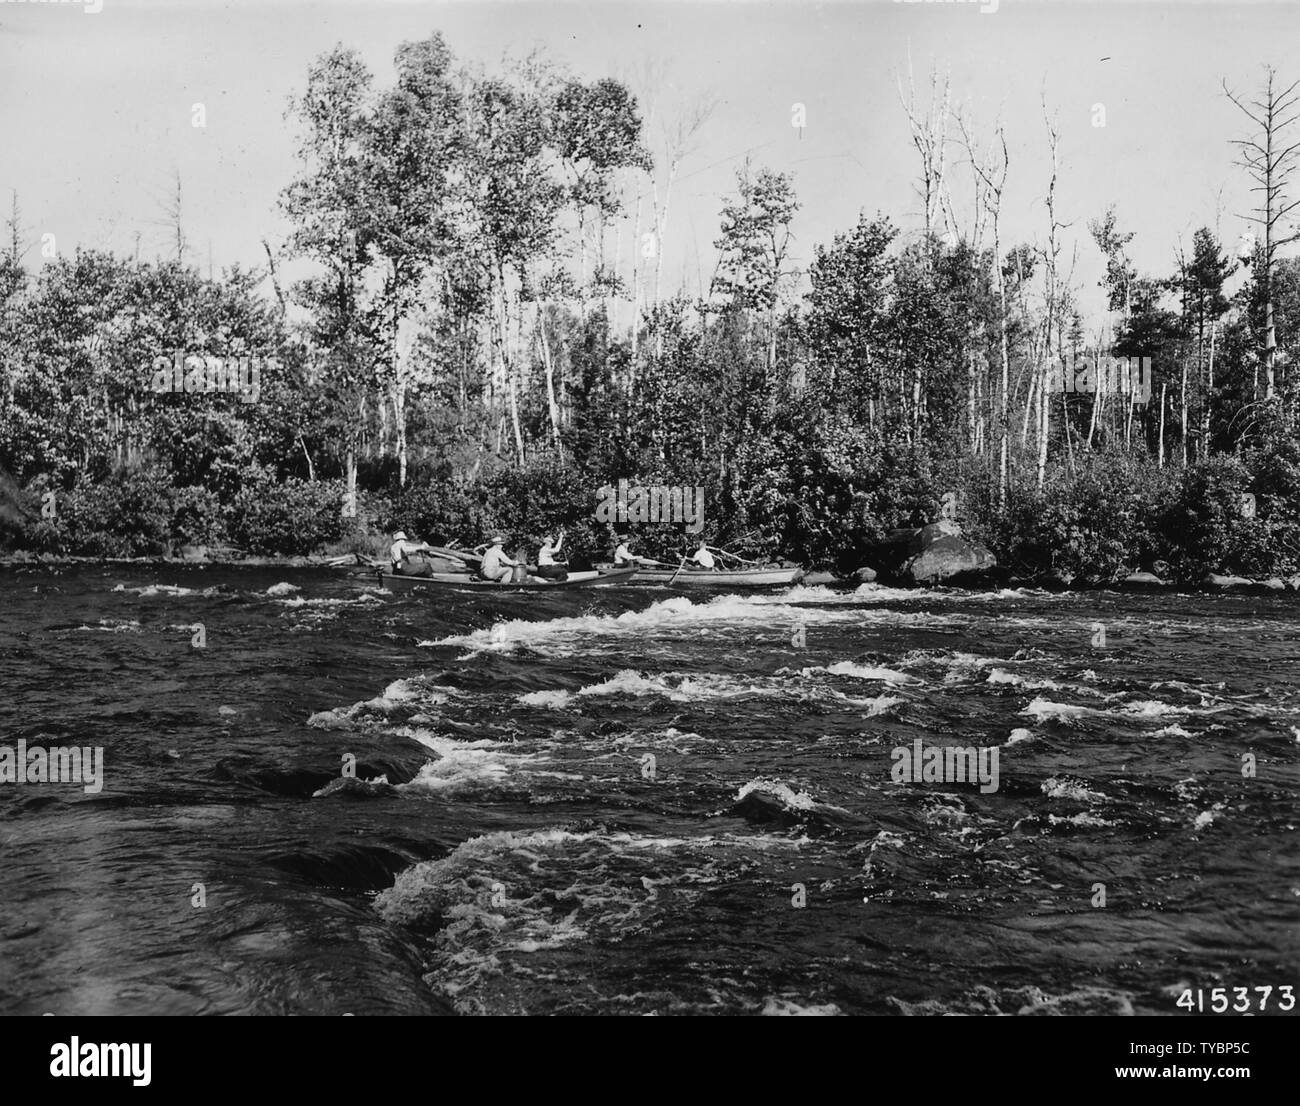 Photograph of Canoes Negotiating White Water on a Fishing Trip; Scope and content:  Original caption: Negotiating white water while on a fishing trip on the North Fork of Flambeau River. Stock Photo